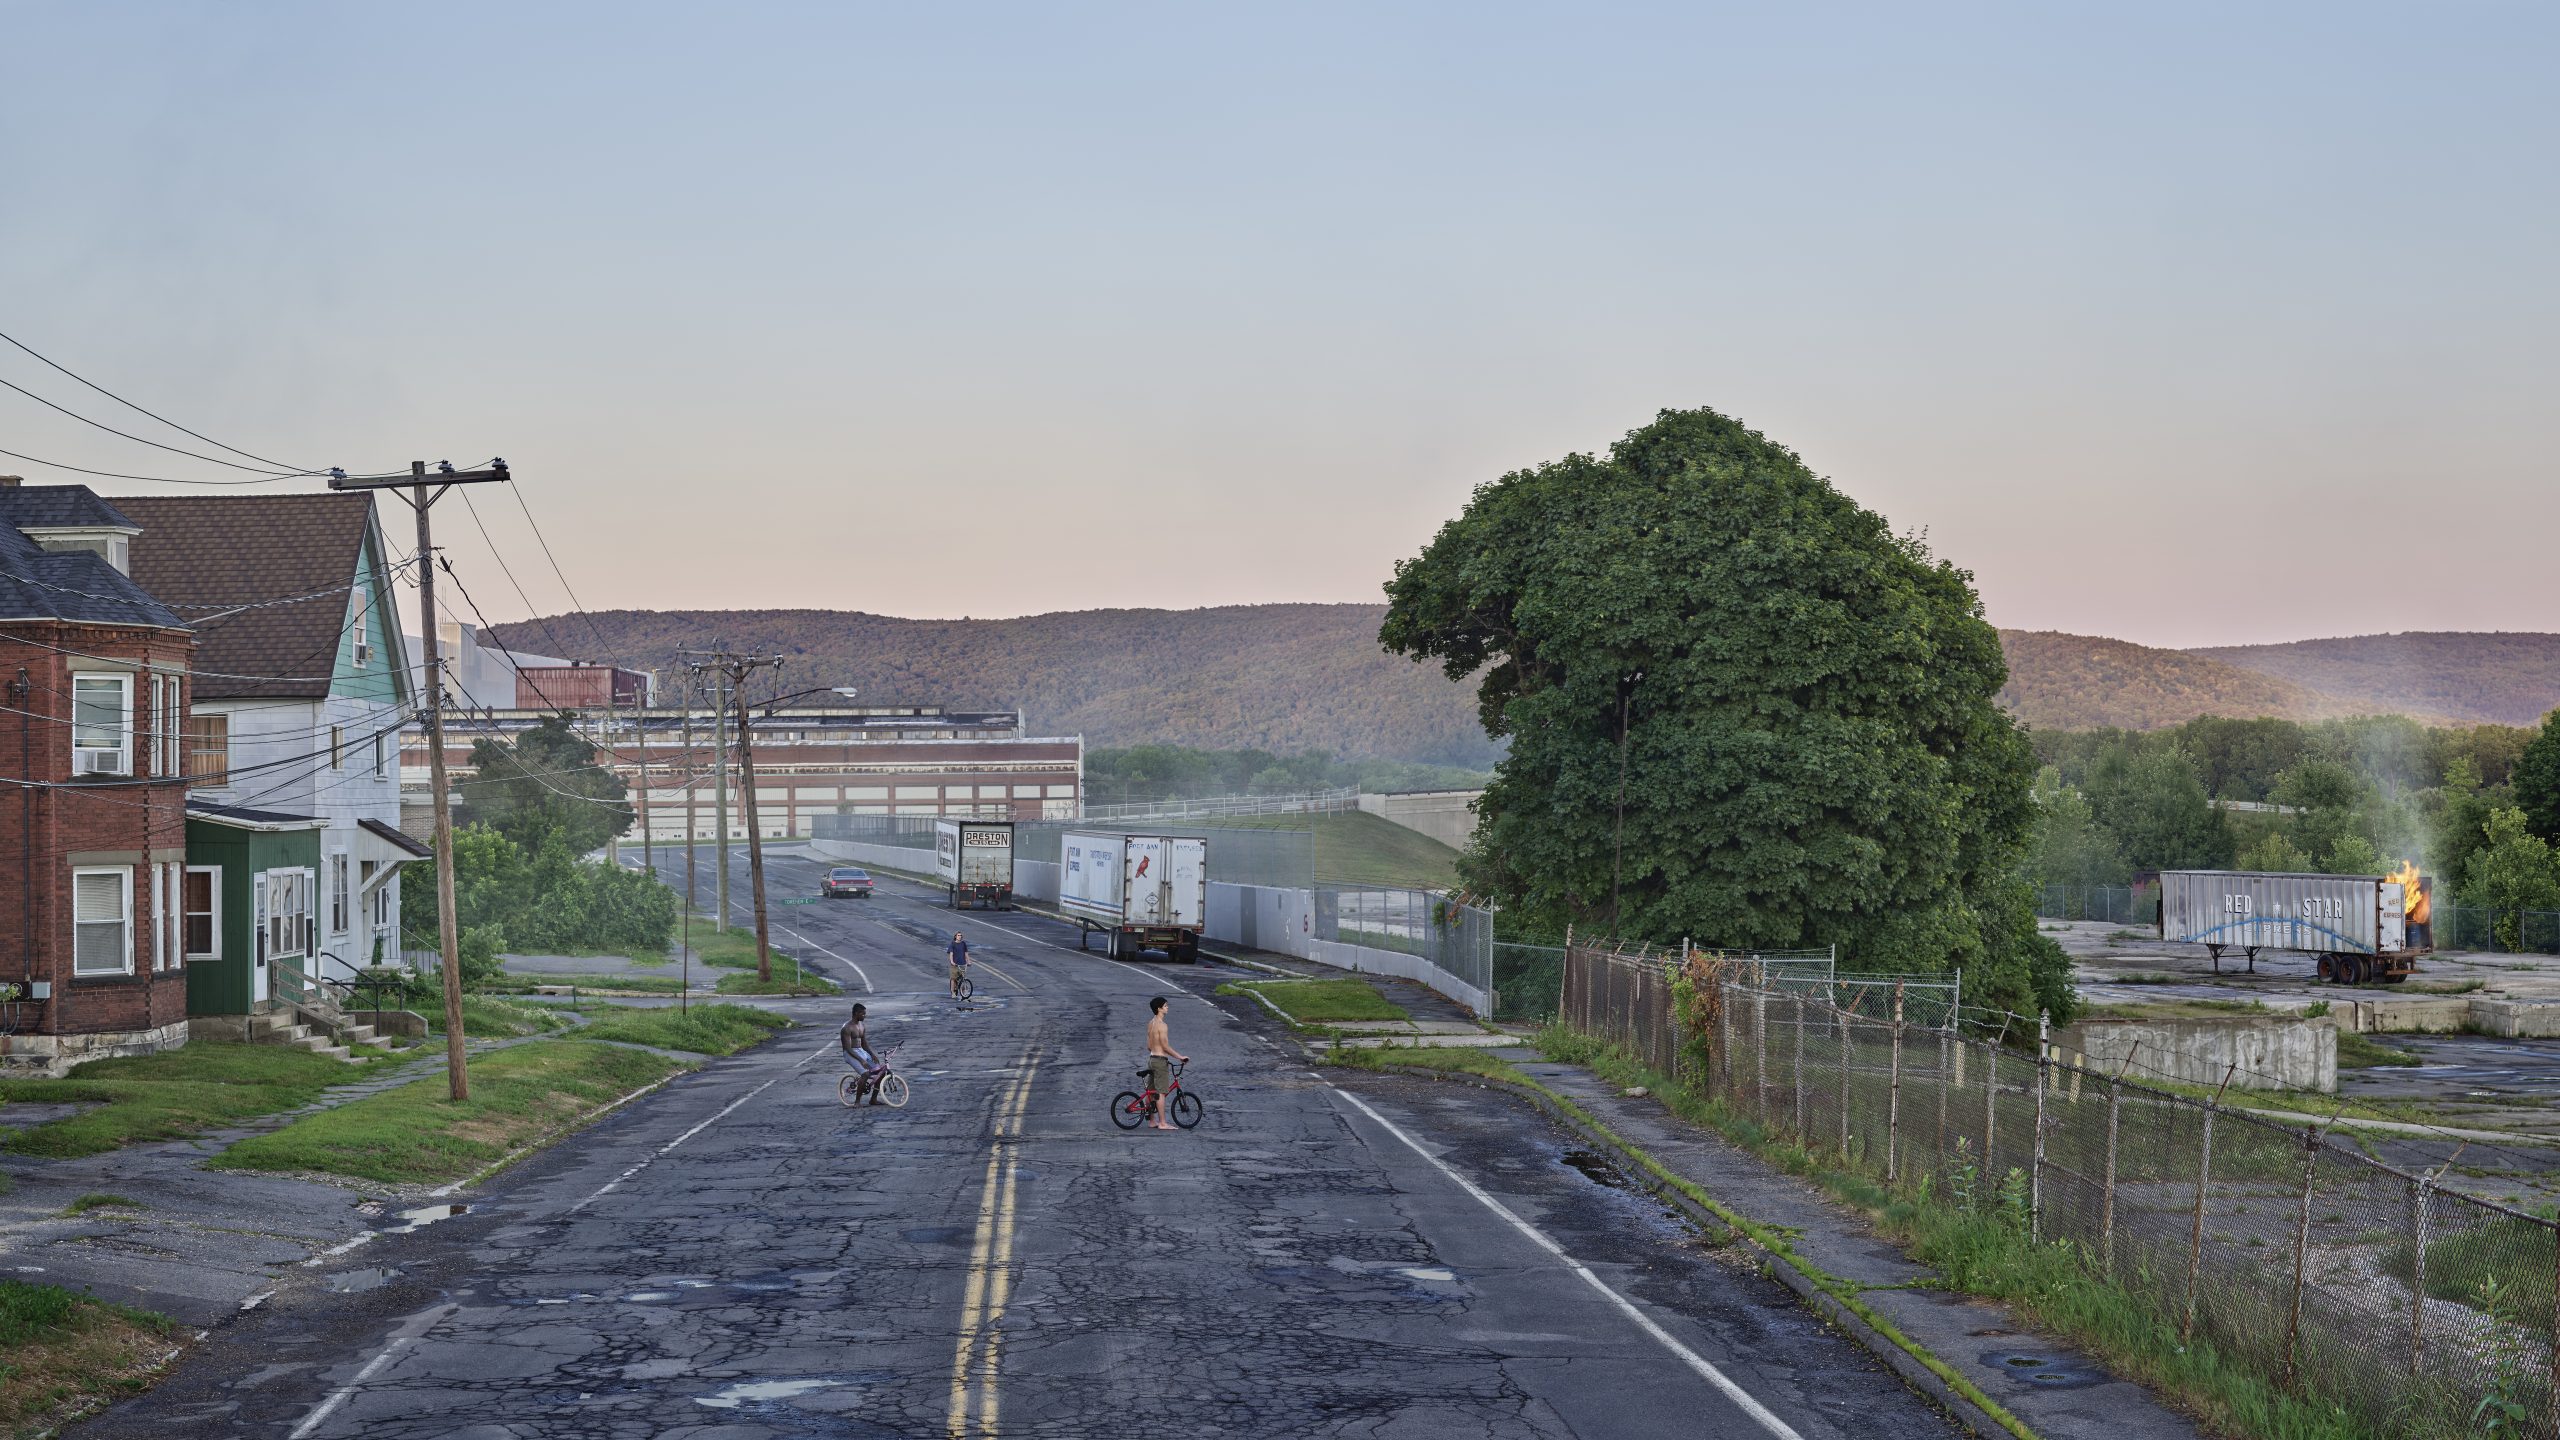 GREGORY CREWDSON, Red Star Express, 2018-2019, Digital pigment Print, Image size_ 50 x 88.9 in. © Gregory Crewdson